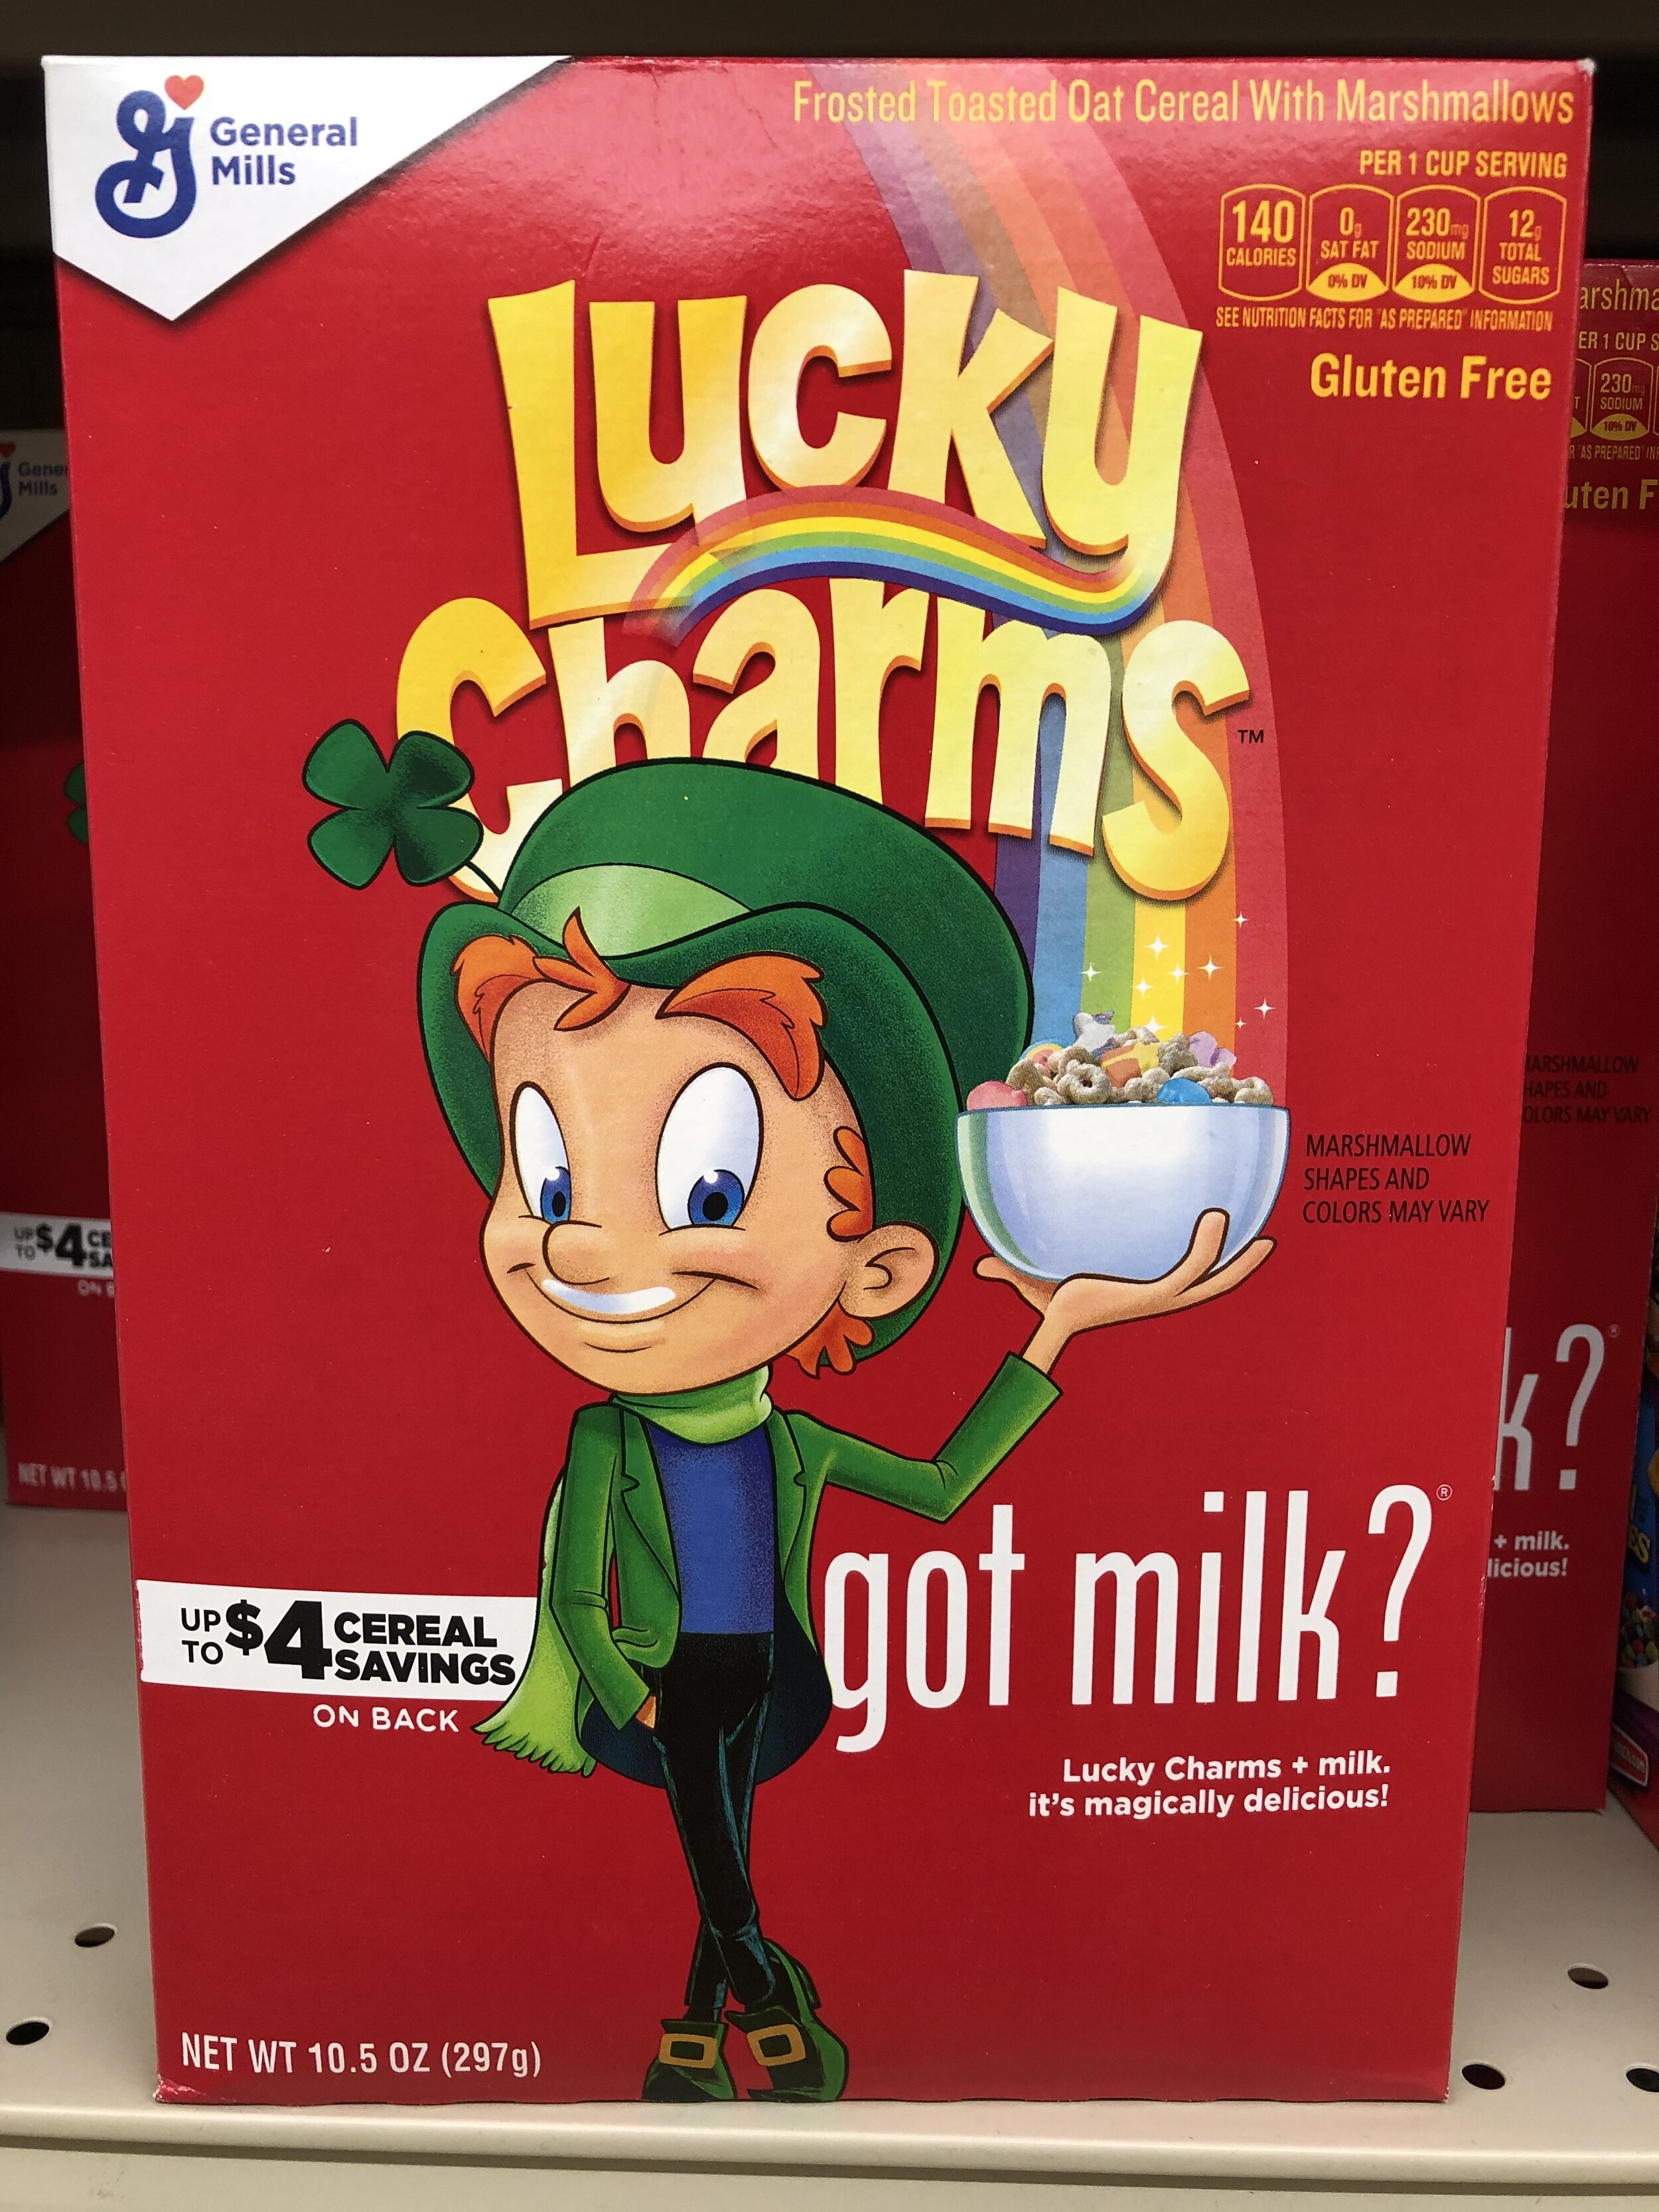 The New Lucky Charms Galactic Cereal is Filled With Out-of-This